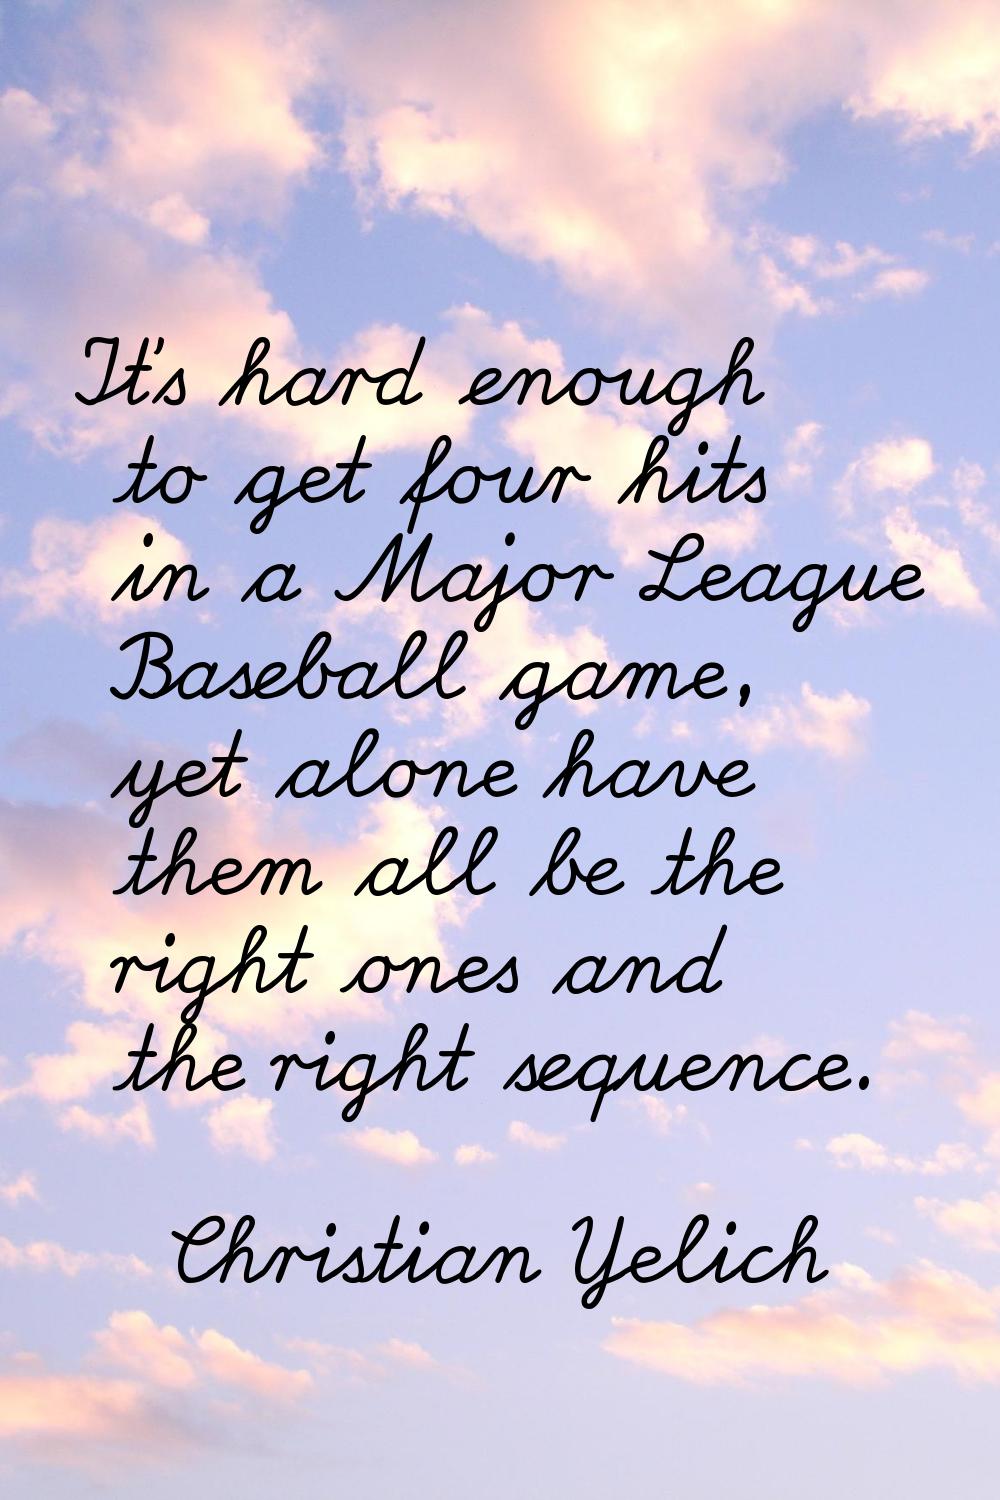 It's hard enough to get four hits in a Major League Baseball game, yet alone have them all be the r